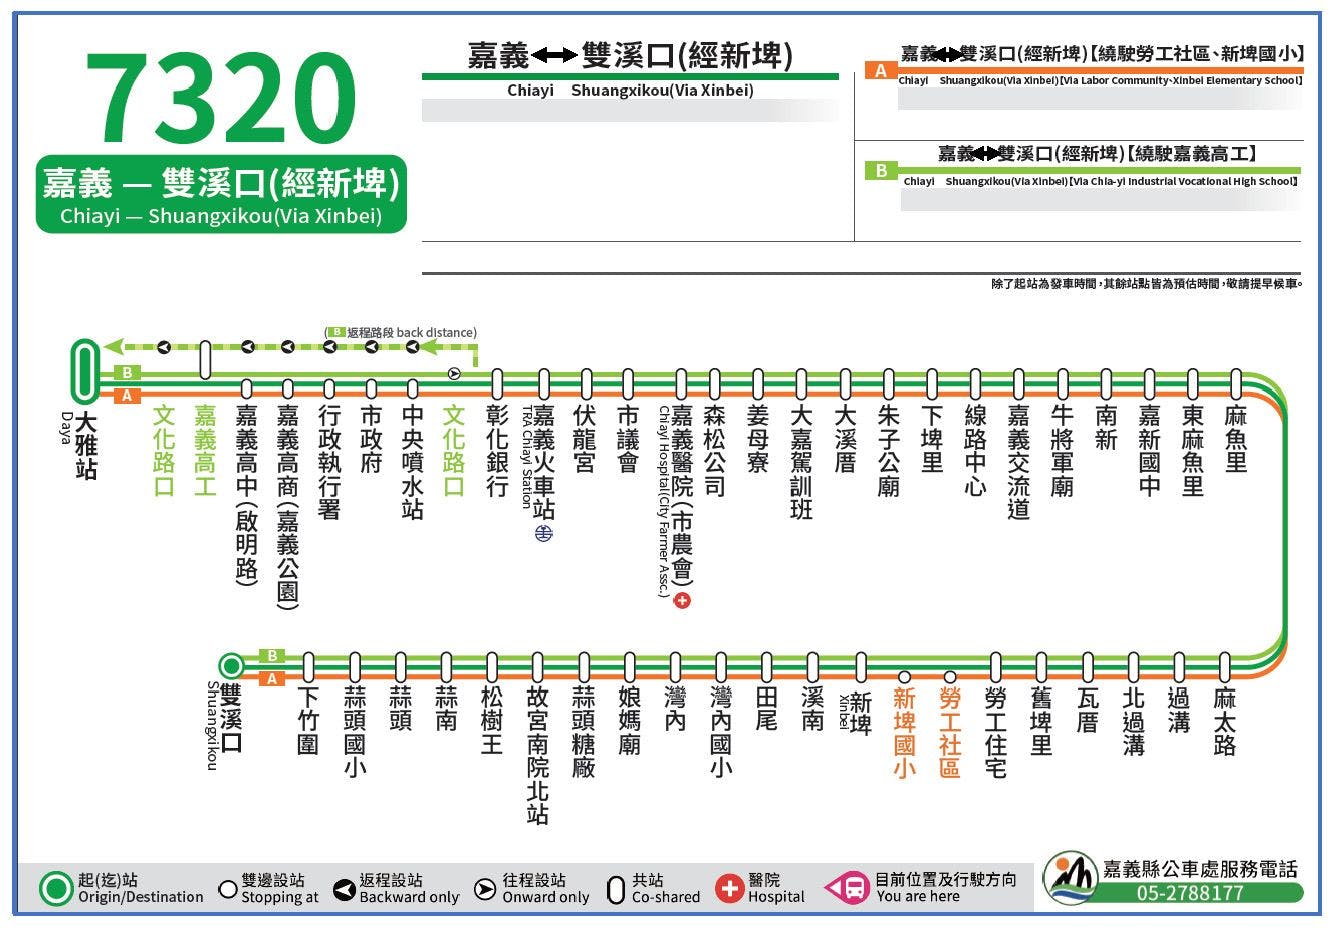 7320Route Map-Chiayi County Bus Service Administration